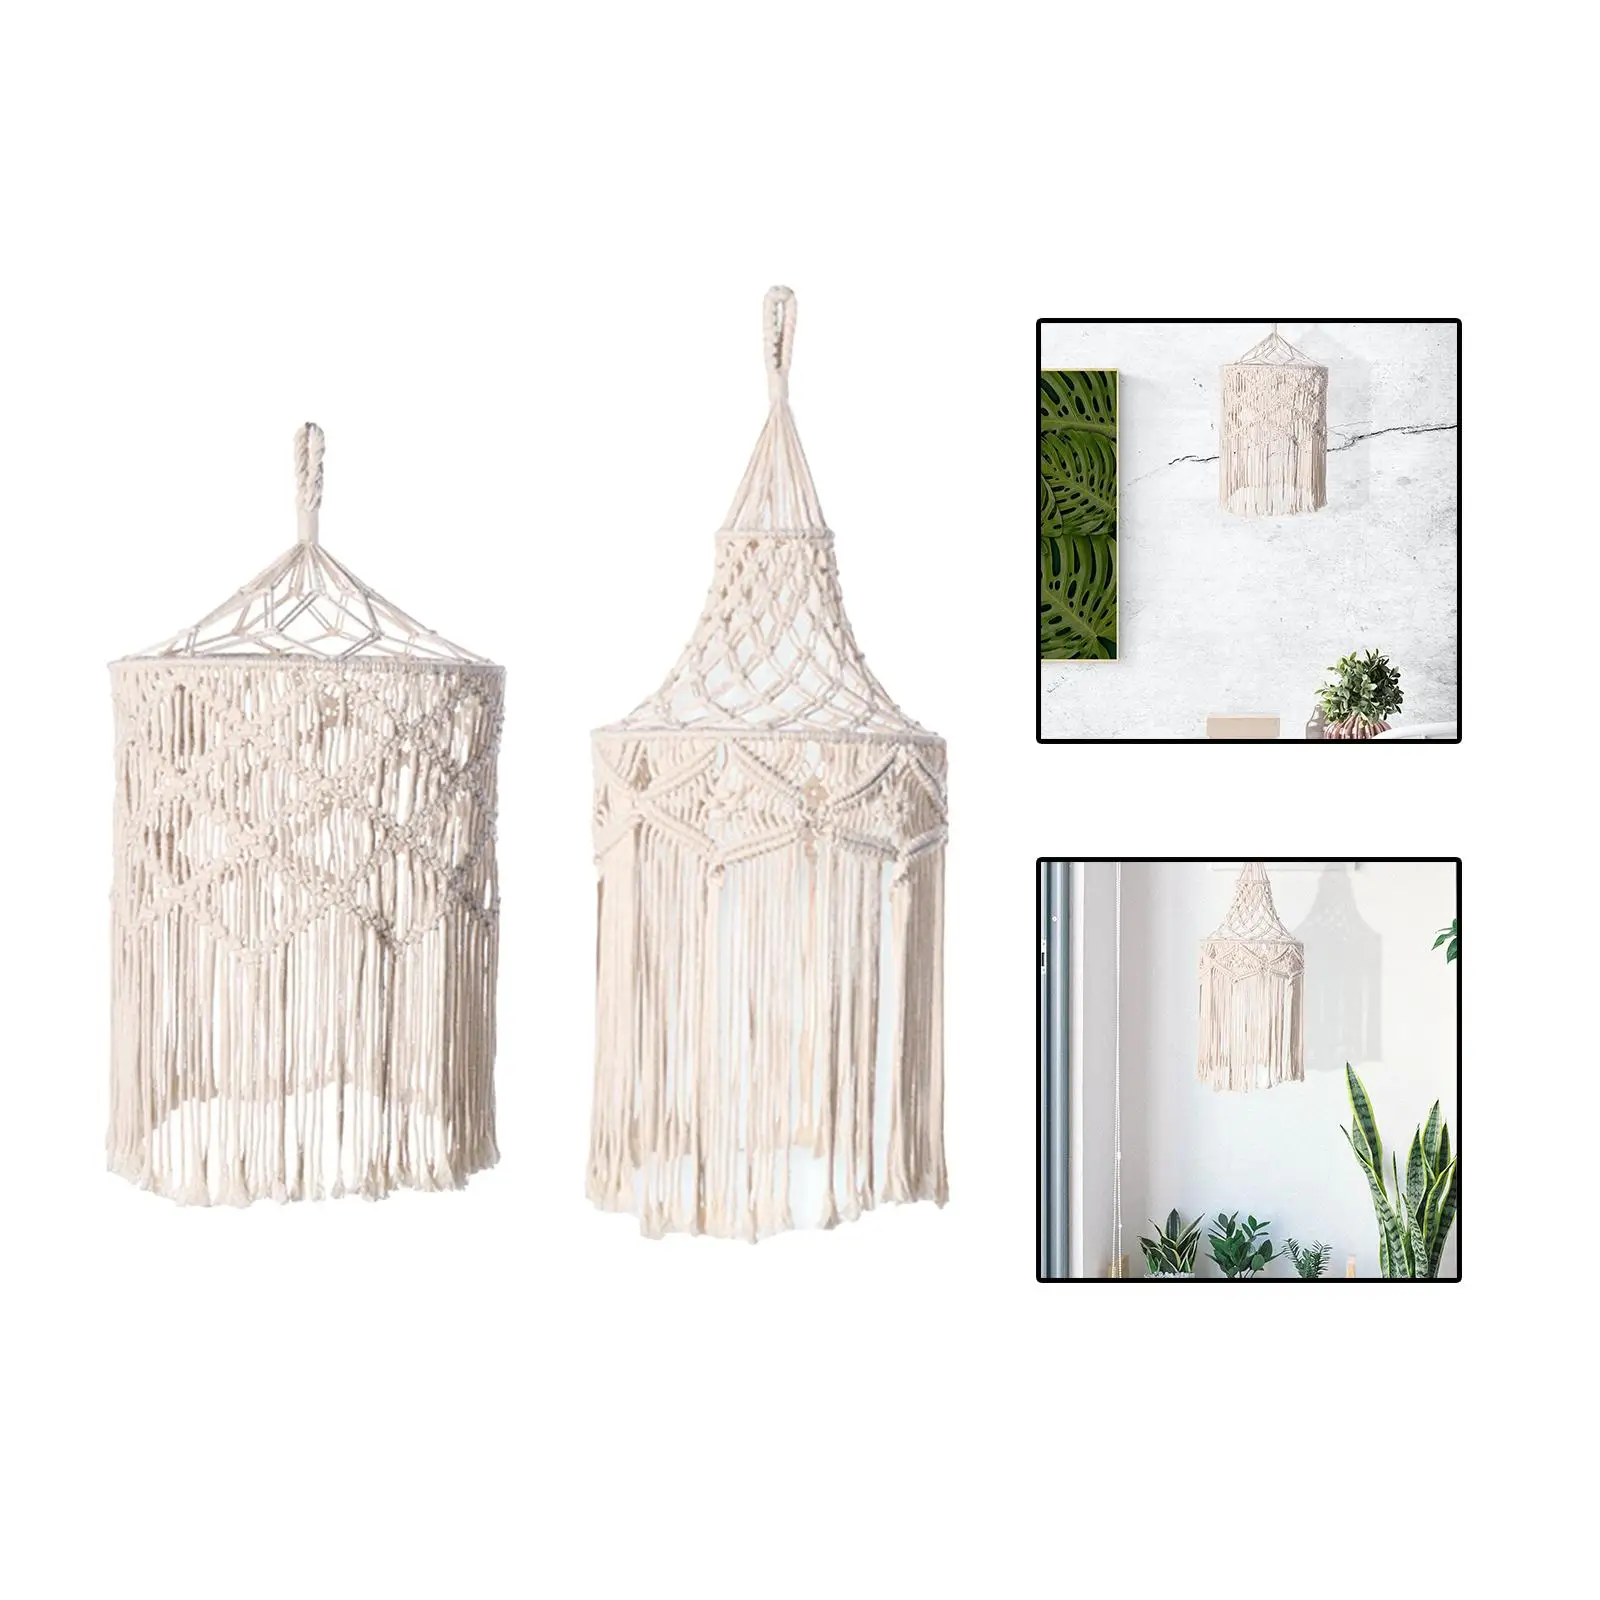 Ceiling Lights Fixture Cover Decor Hand Weaved Lighting Macrame Lampshade Boho Hanging Pendant Light Cover for Office Kitchen